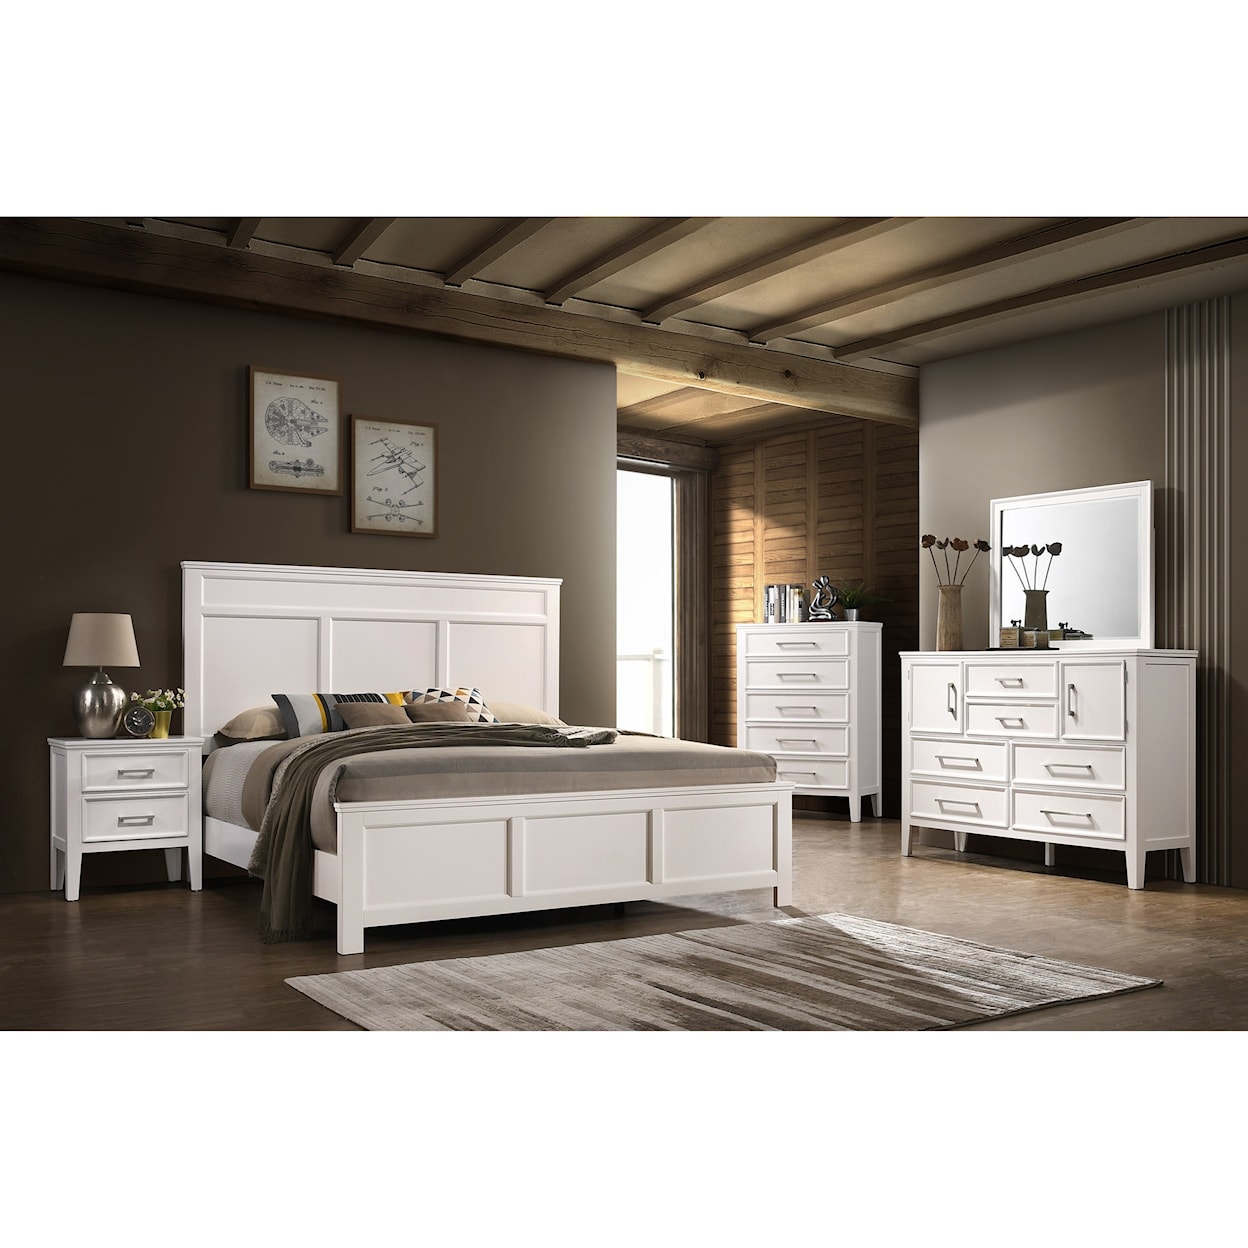 New Classic Andover King Bedroom Group